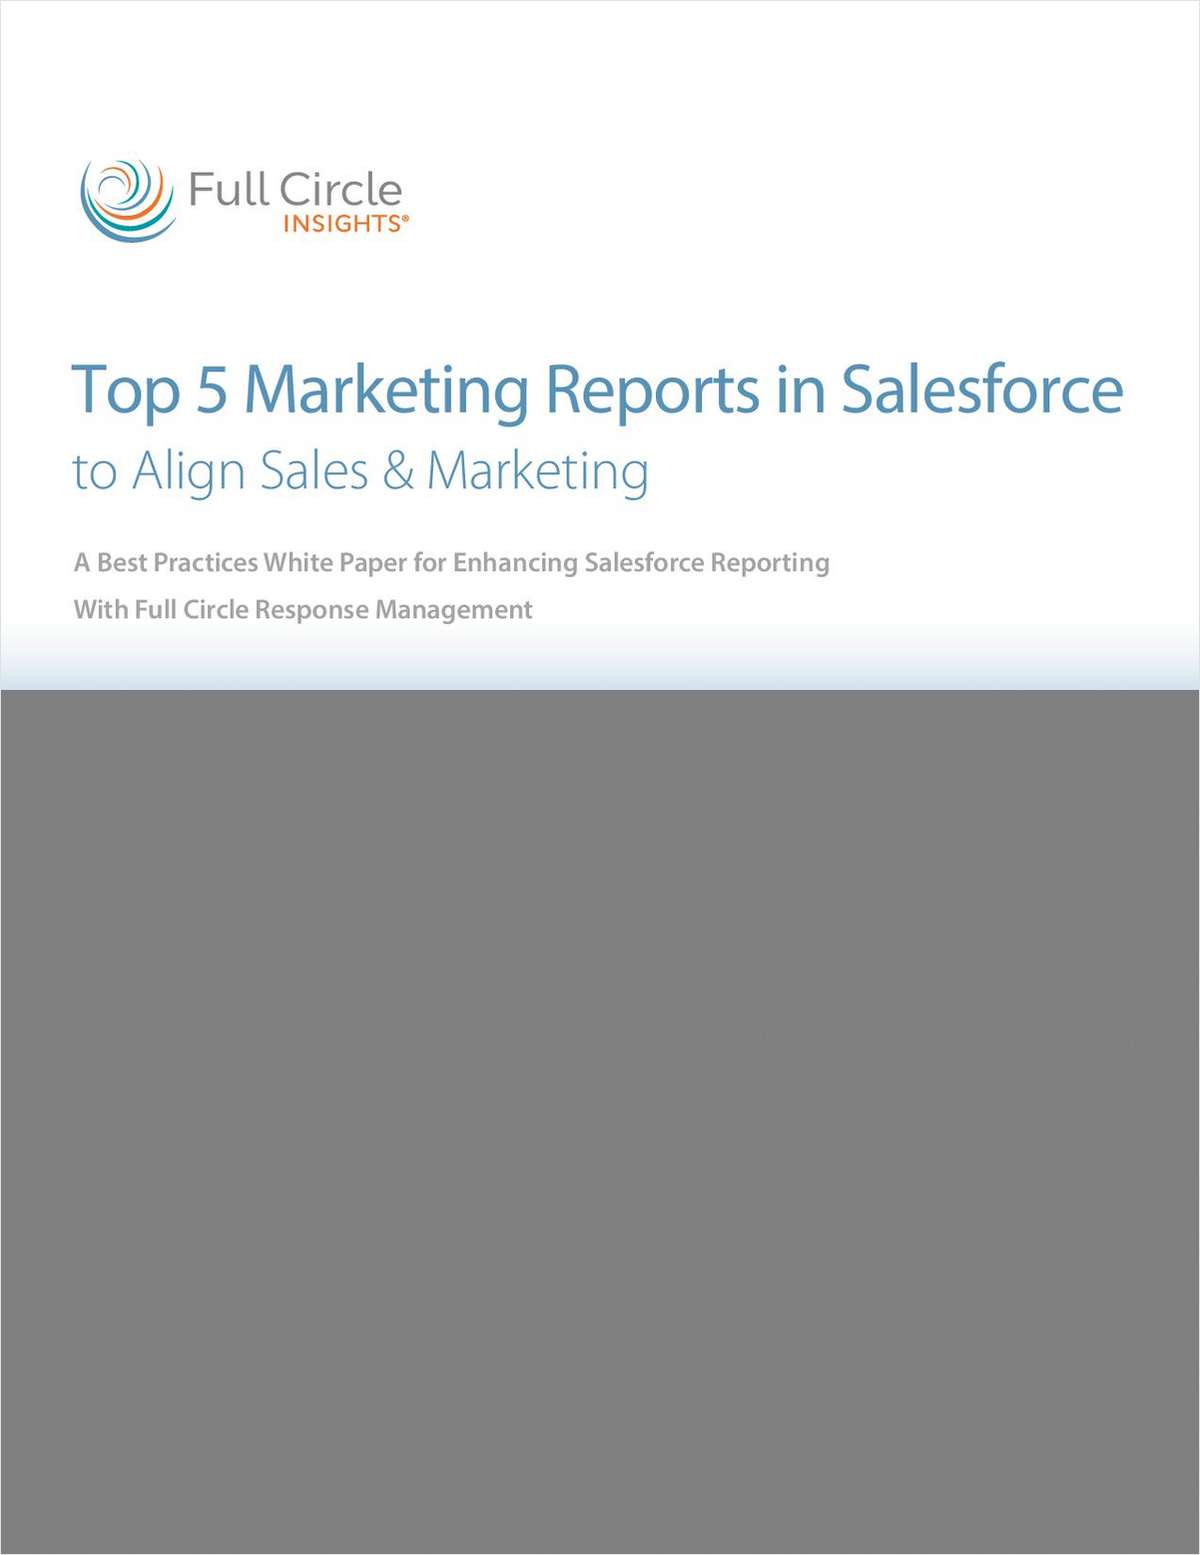 Top 5 Marketing Reports in Salesforce to Align Sales & Marketing